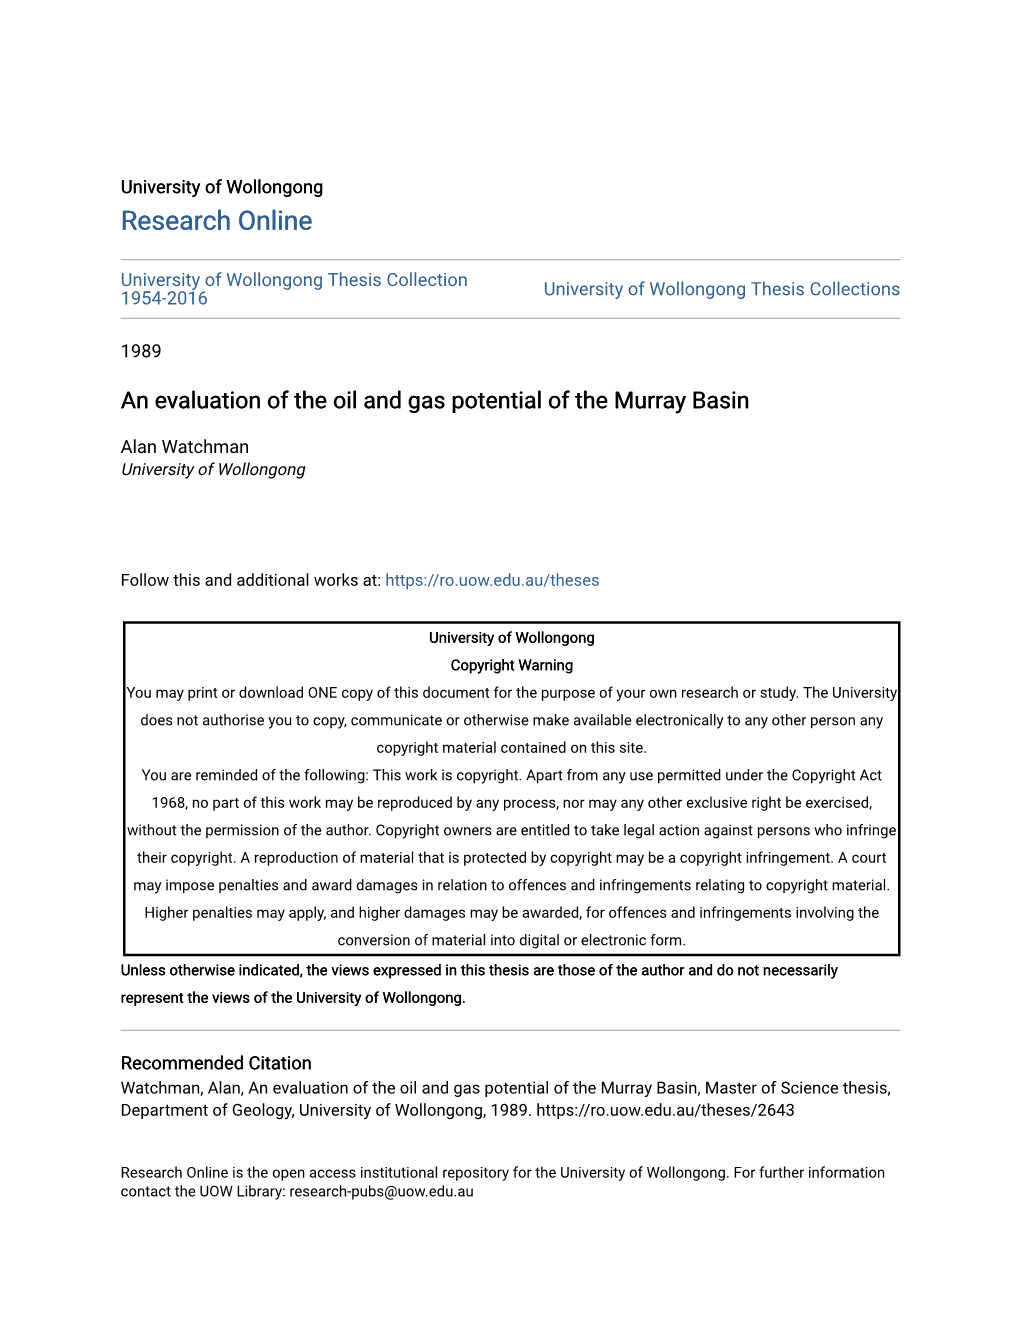 An Evaluation of the Oil and Gas Potential of the Murray Basin